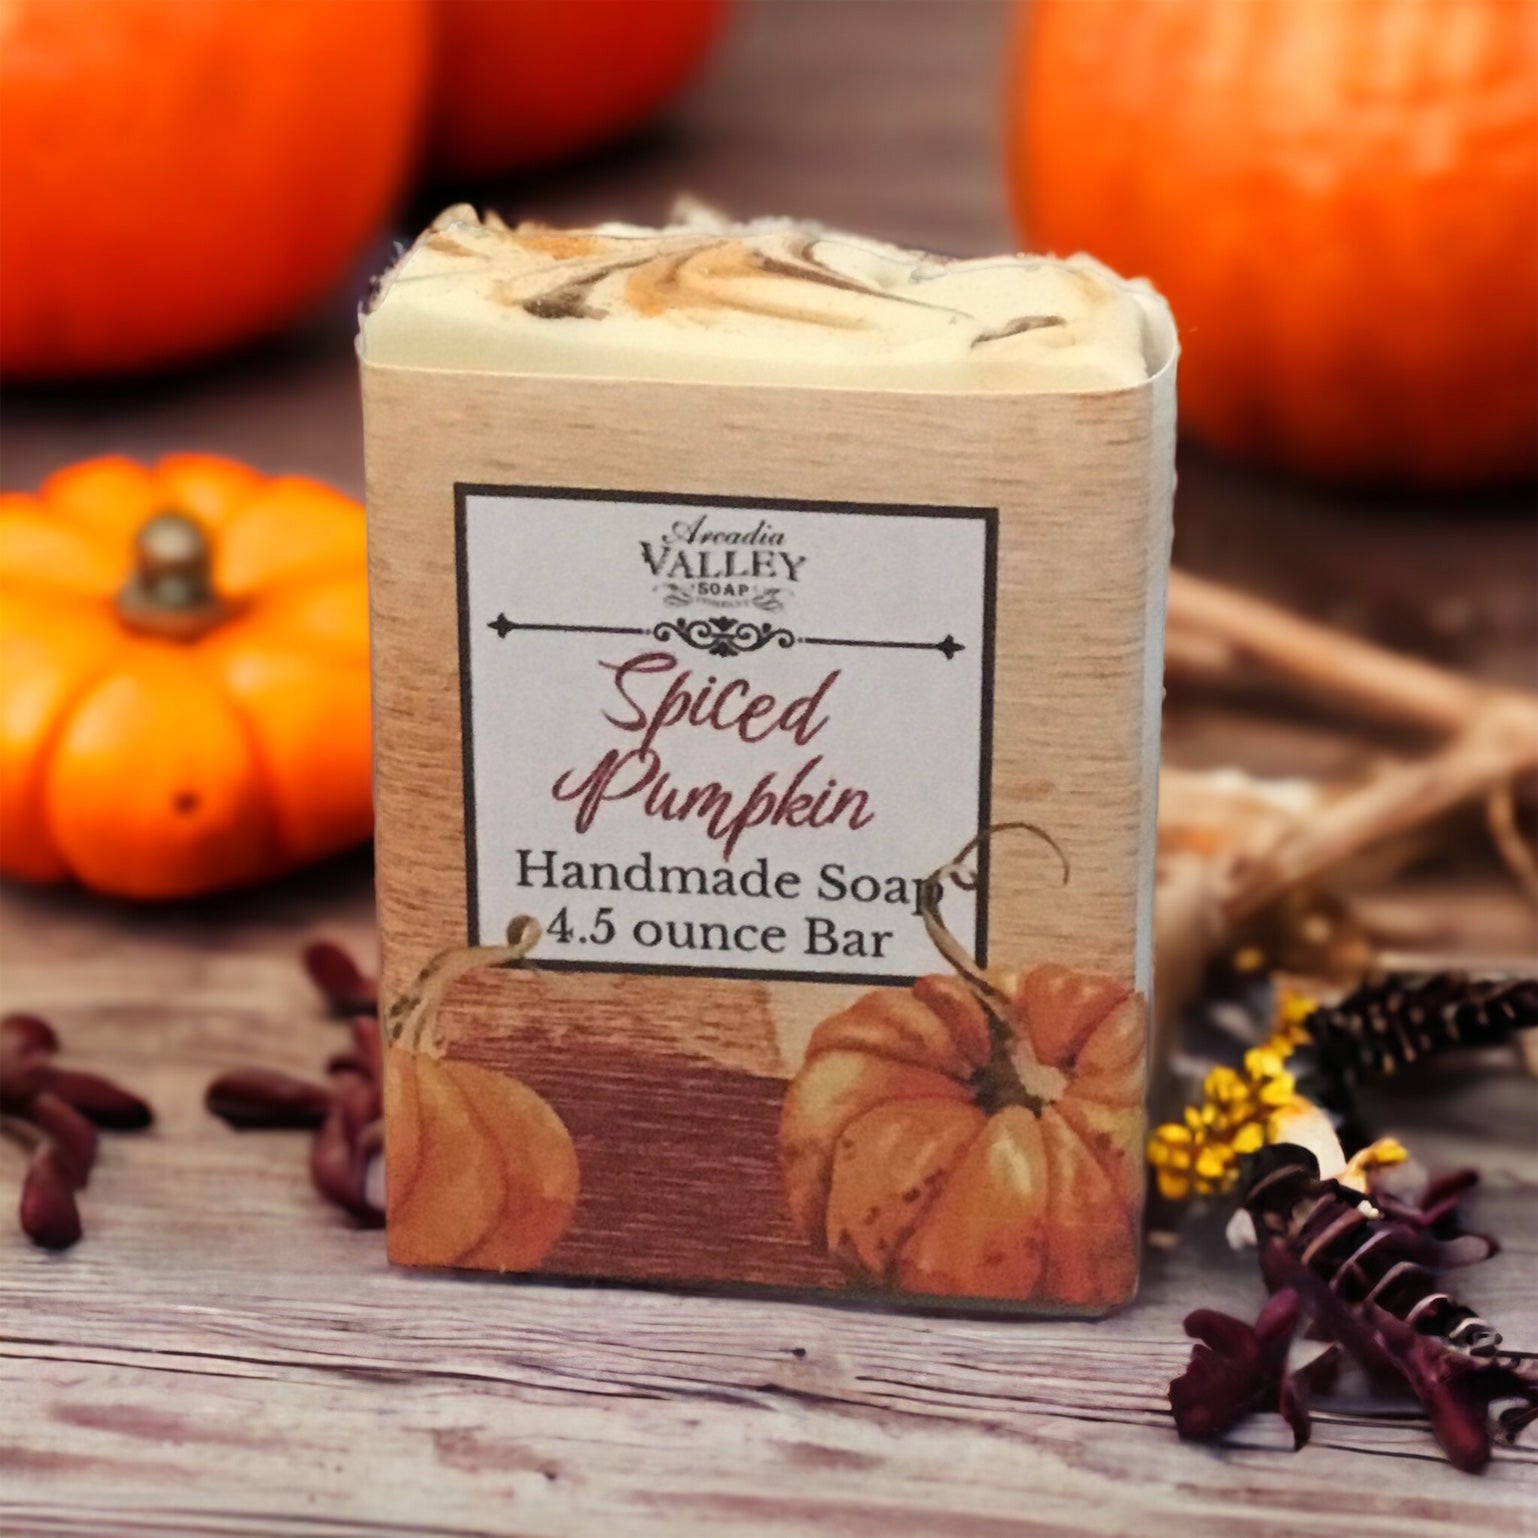 Spiced pumpkin soap with decorative paper wrapper sitting on a wooden table with pumpkins and spices on display